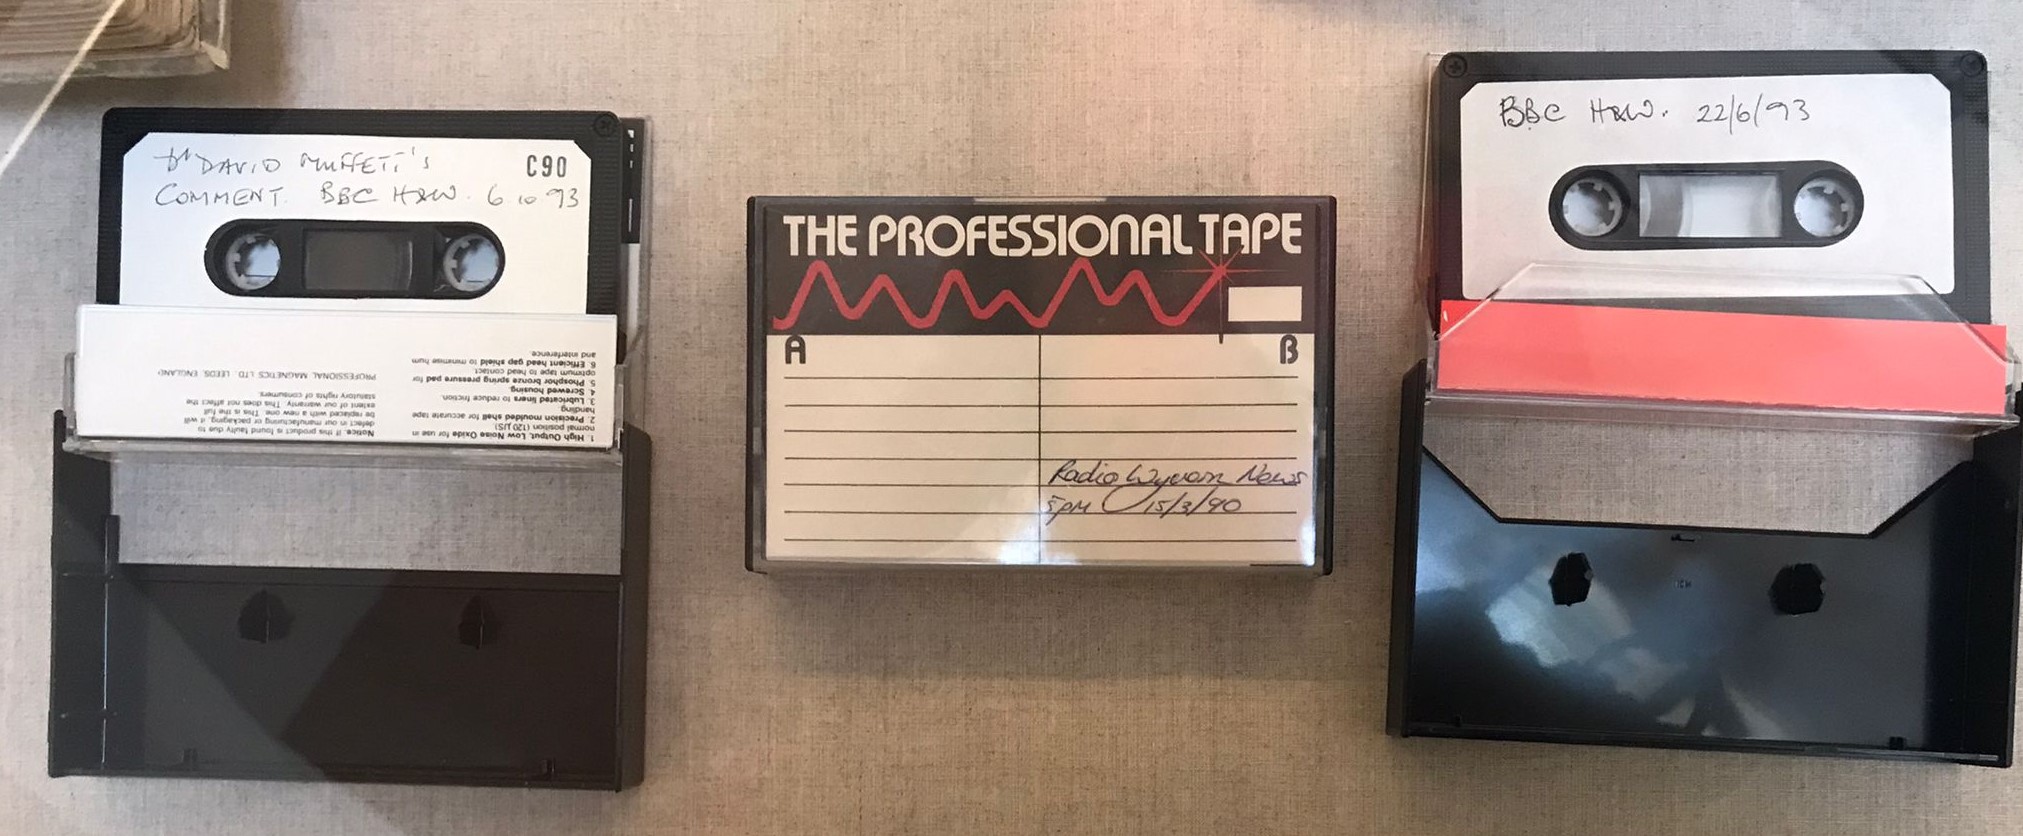 Tapes containing recordings from the radio